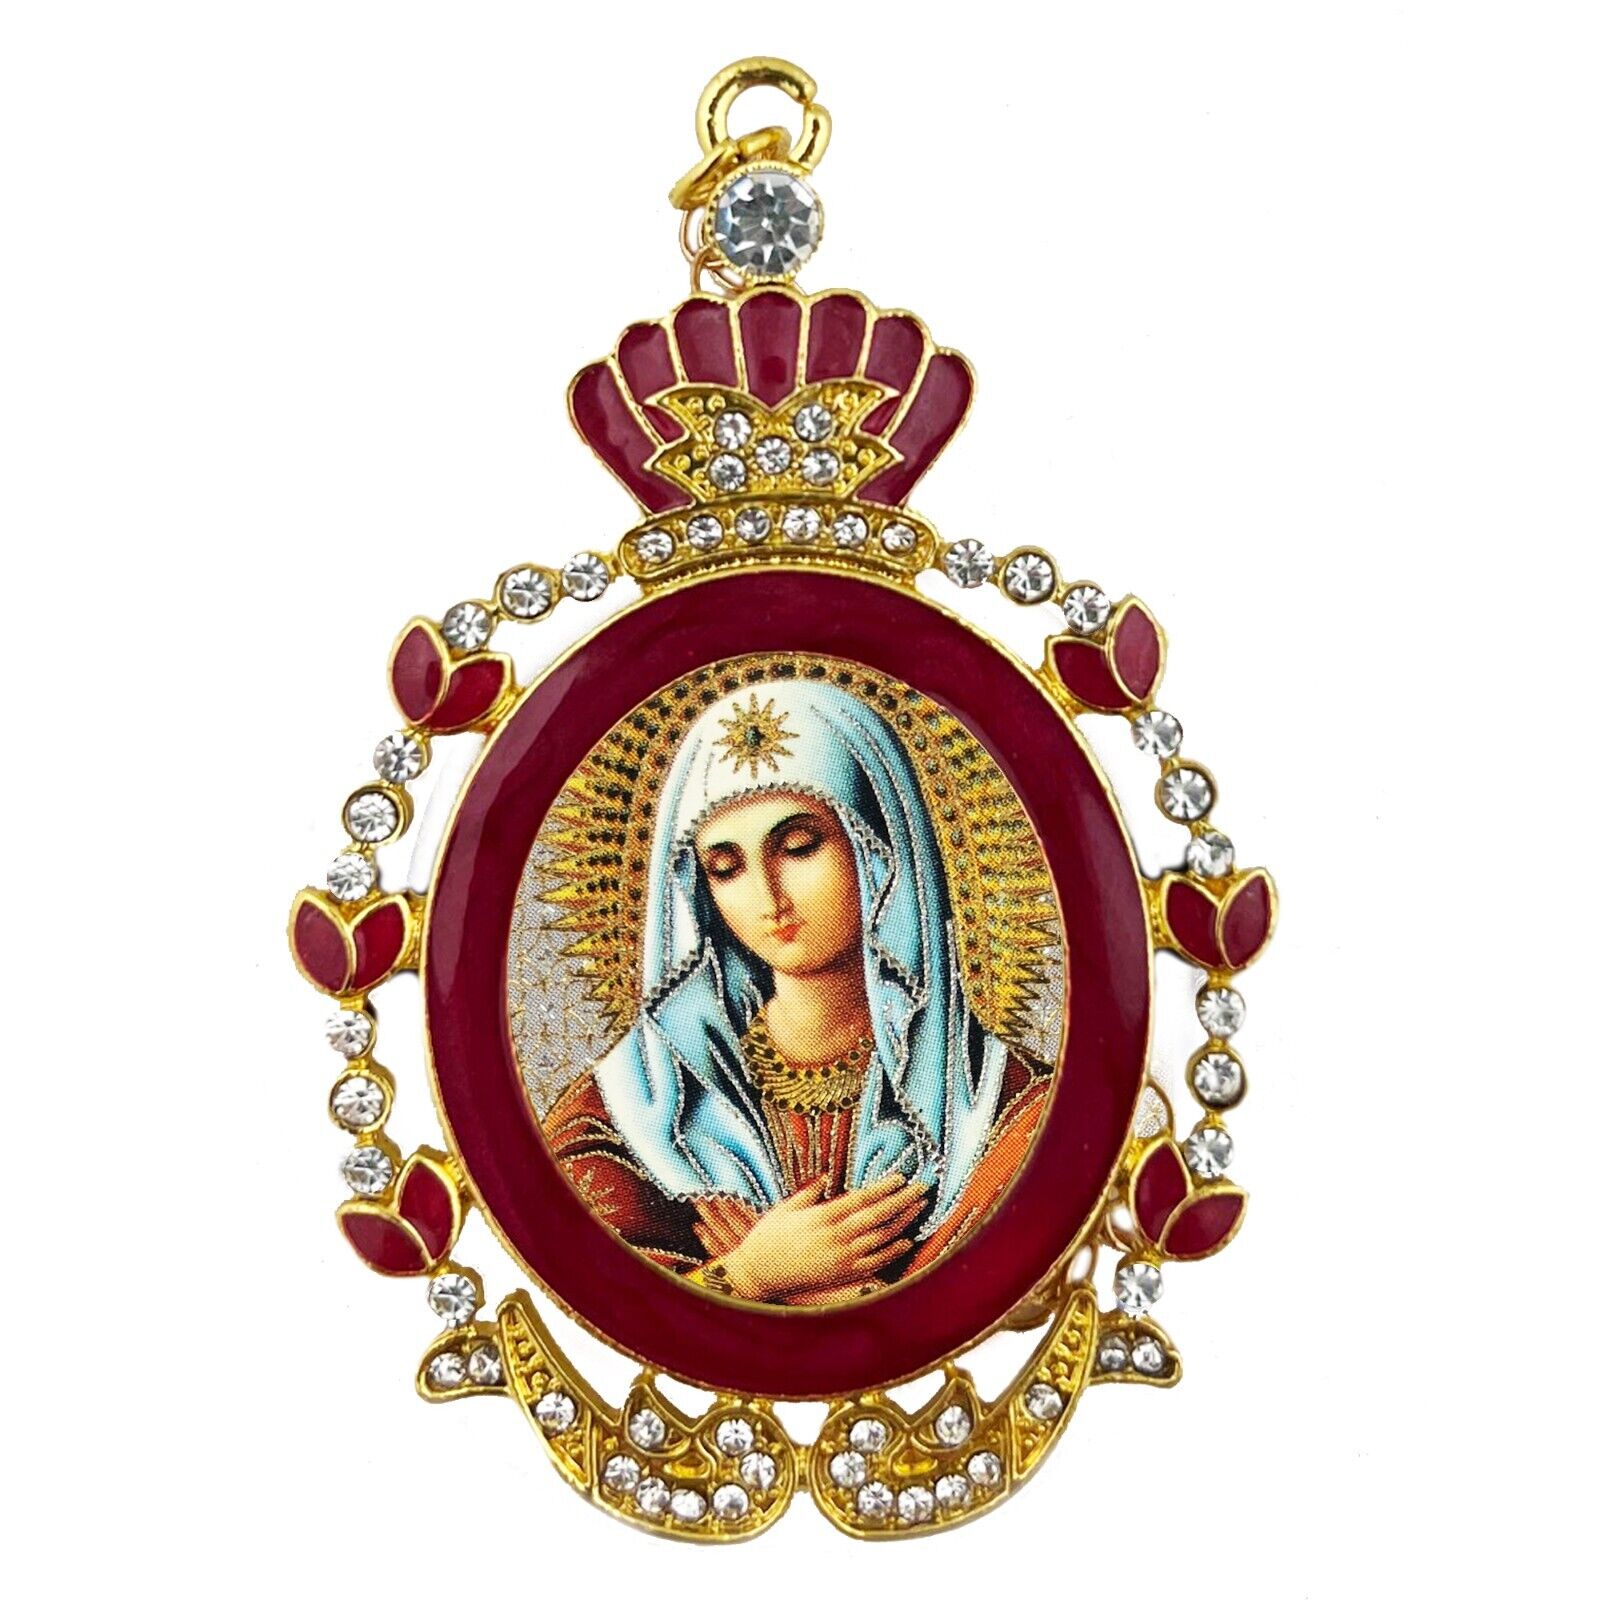 Saint Mary Madonna Extreme Humility Icon Pendant Room Decoration Gift for Her